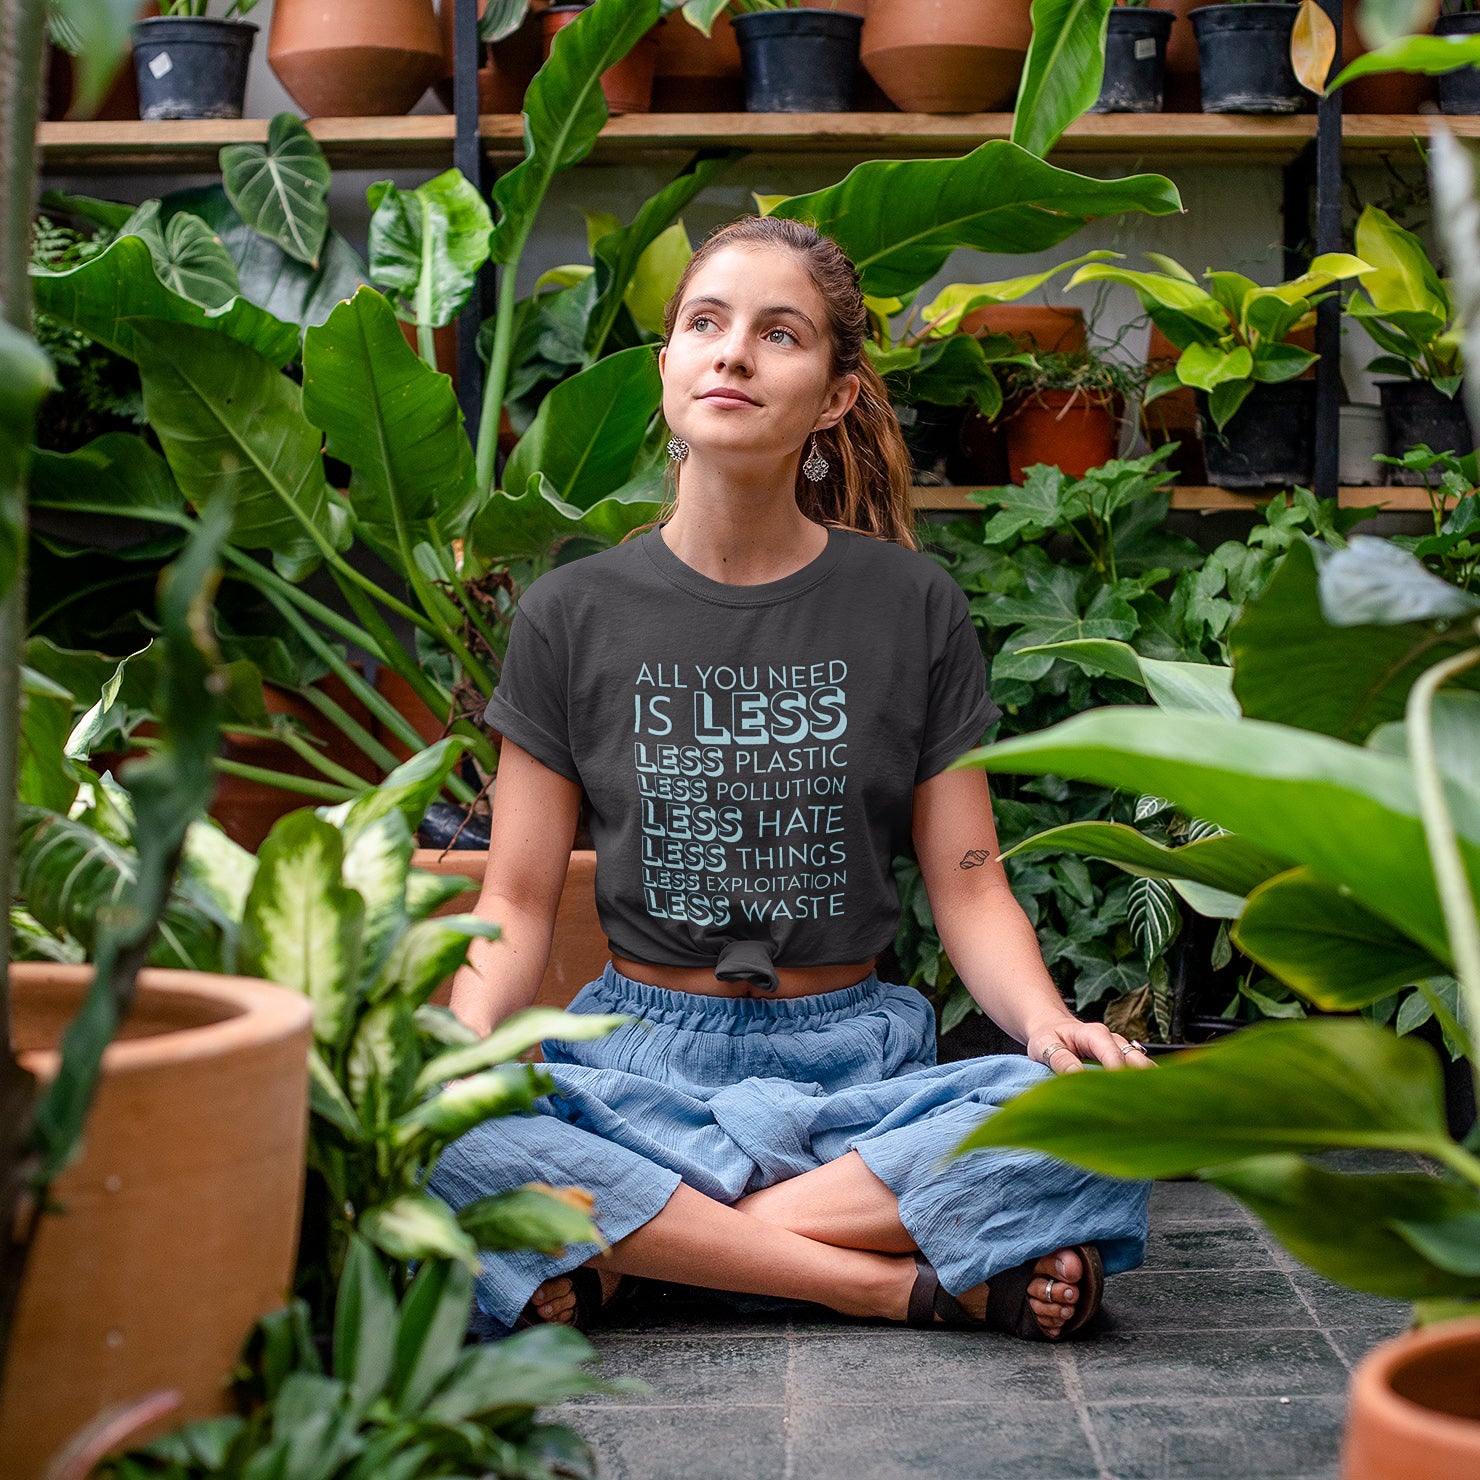 girl in greenhouse surrounded by plants wearing gray Connected Clothing Company "All You Need Is Less" shirt - Connected Clothing Company donated 10% of profits to non-profit organizations - ethically and sustainably made clothing